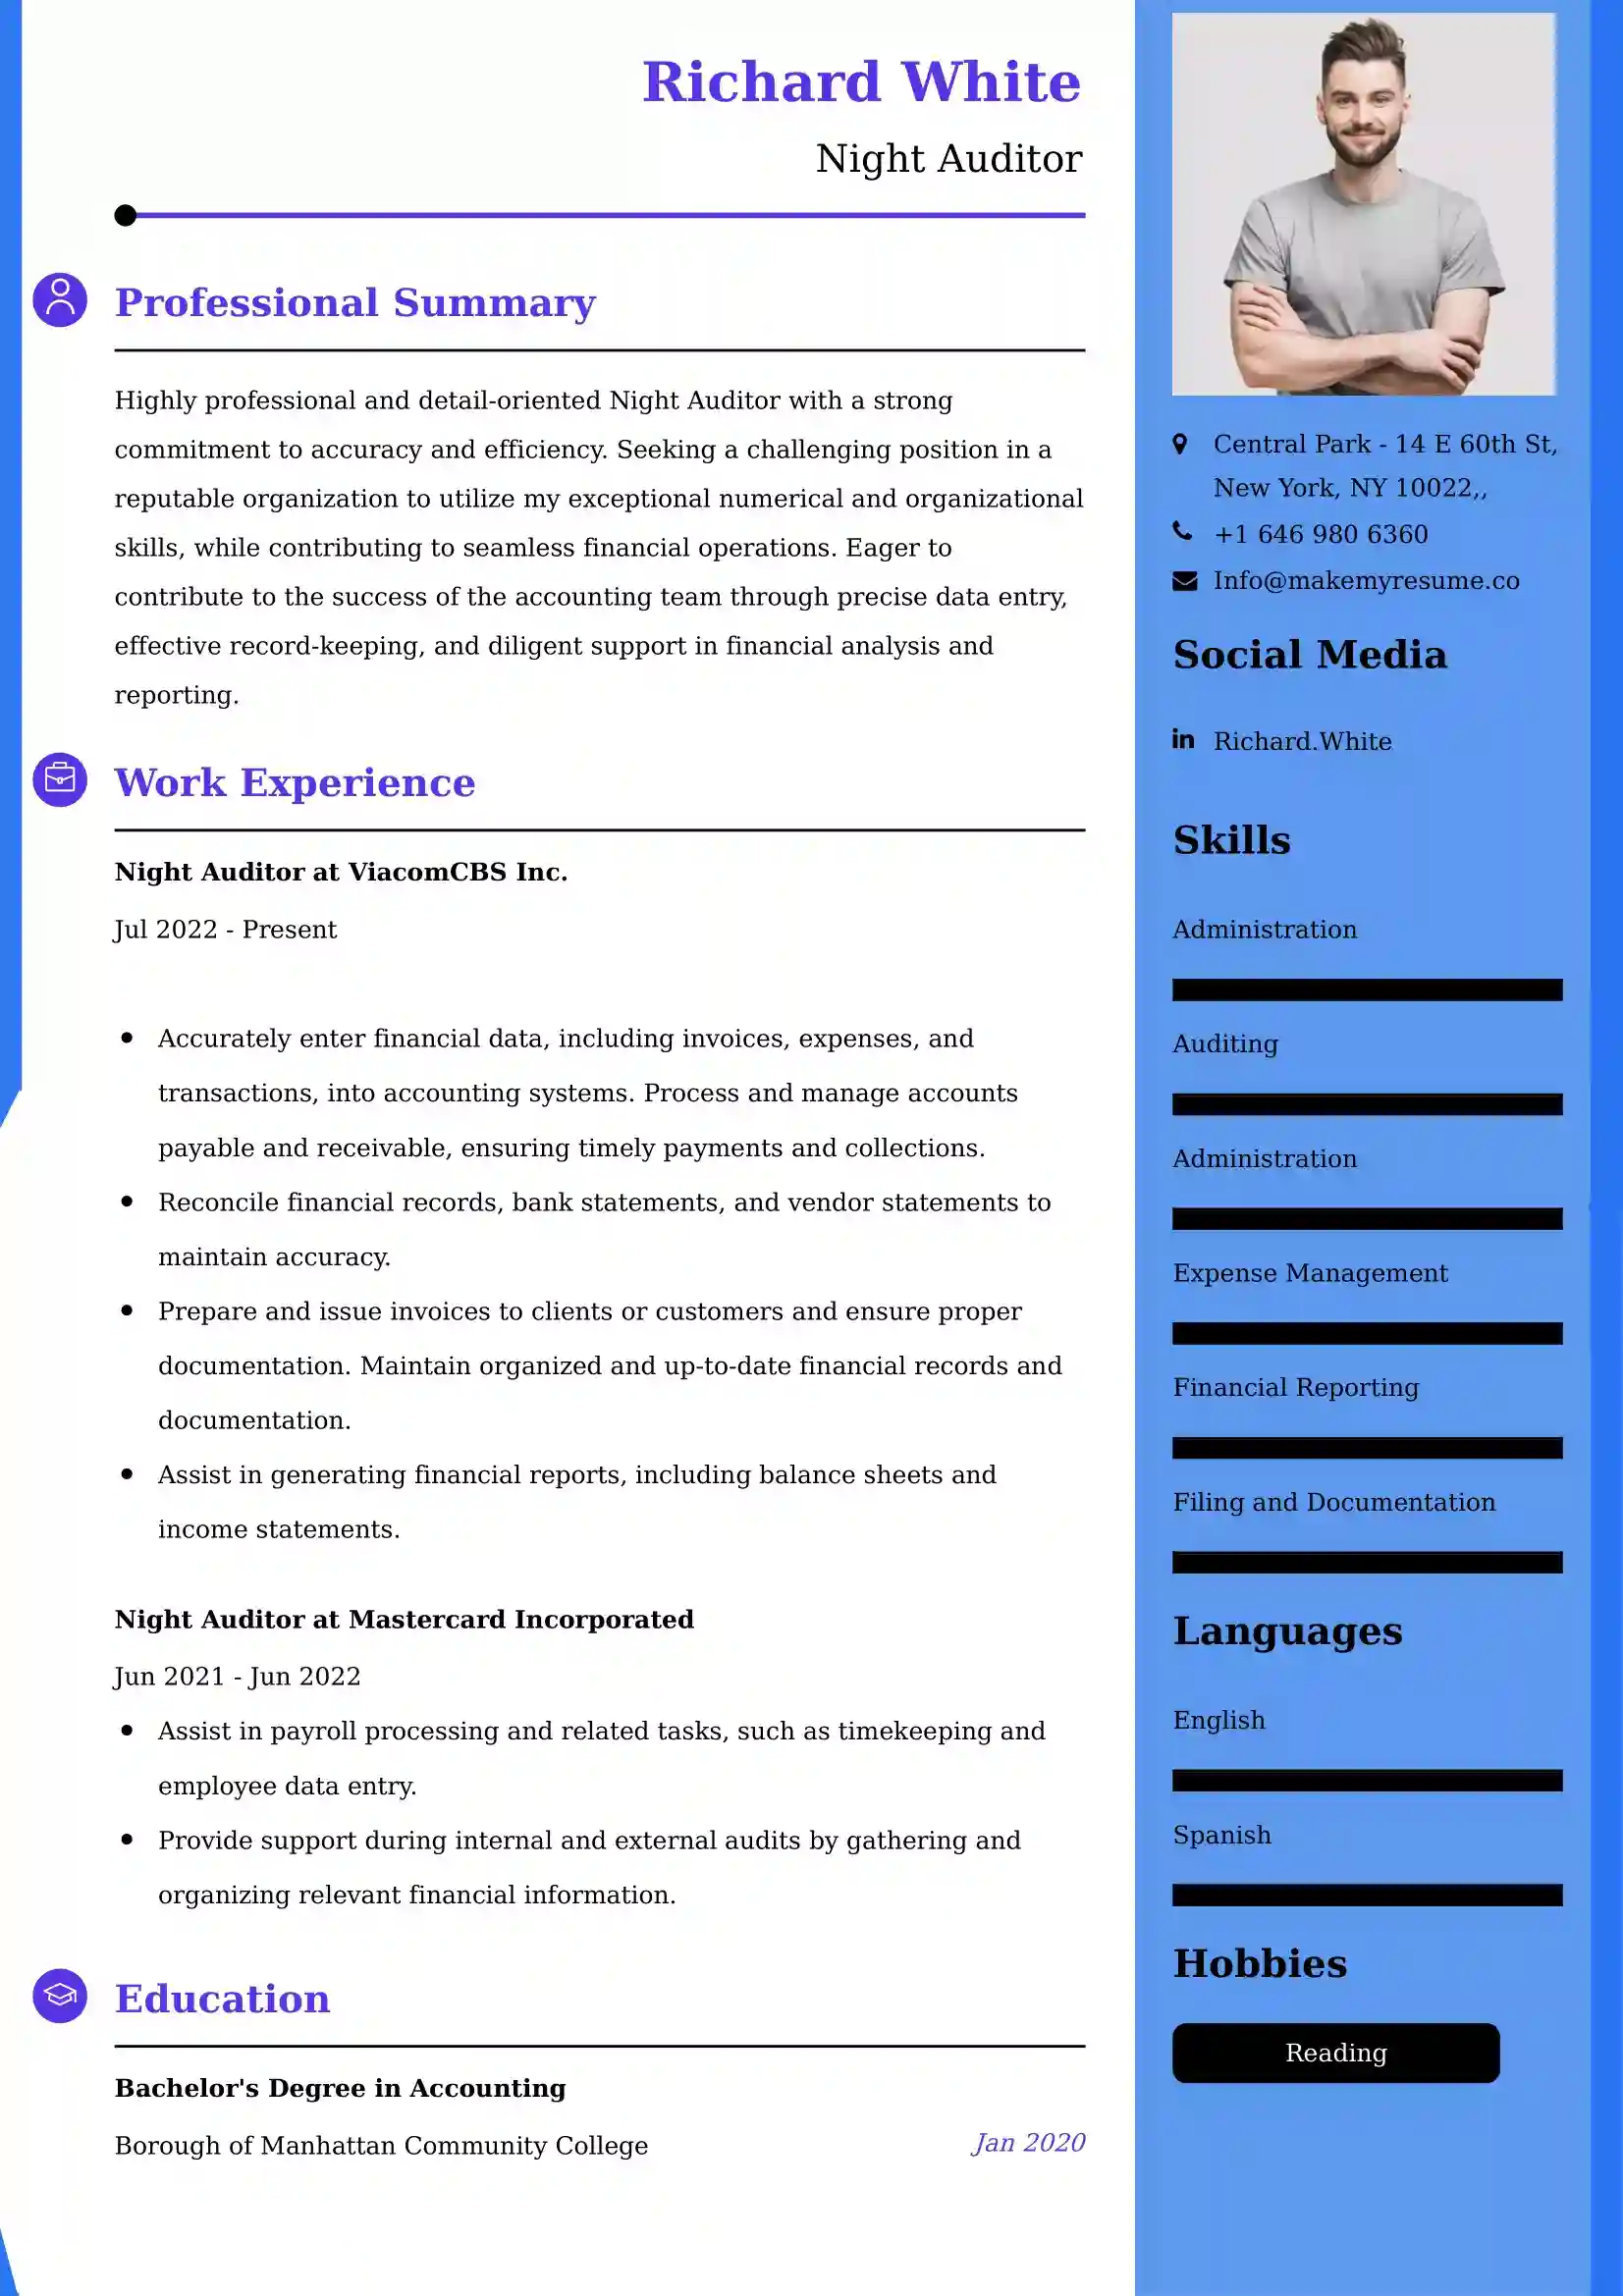 Night Auditor Resume Examples - UK Format, Latest Template.